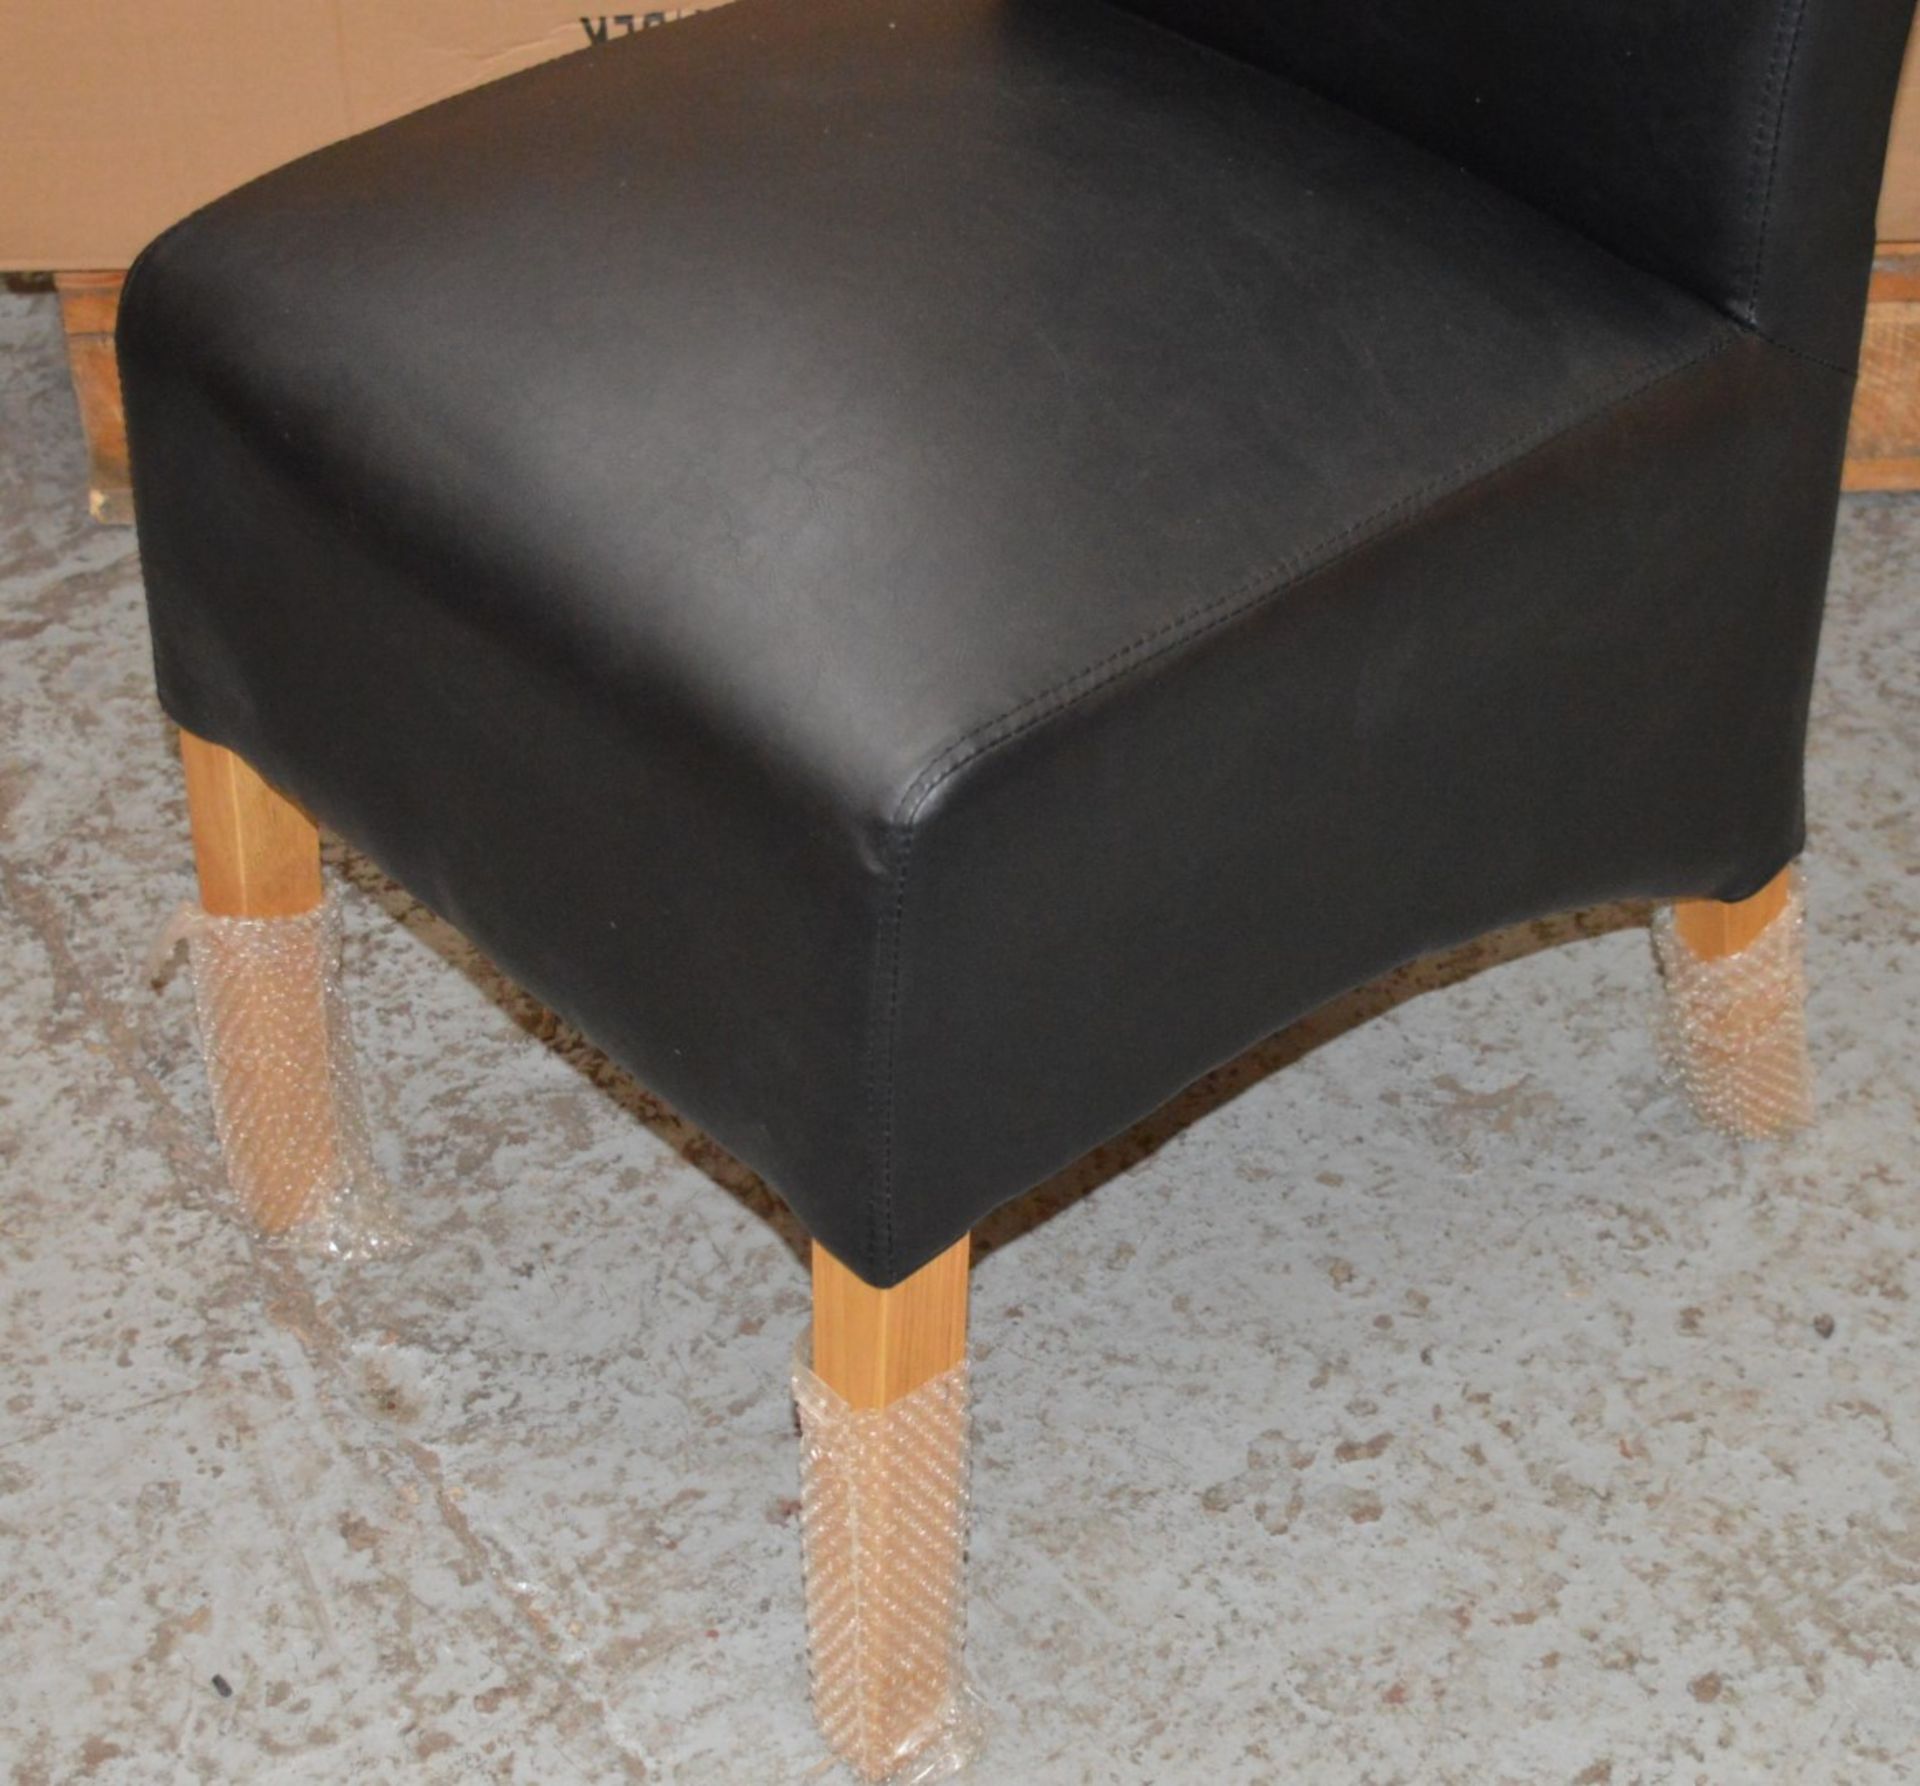 2 x Black Faux Leather Dining Chairs - Seating Dimensions: W44 x D60 x Height 106cm, Seat Height 47c - Image 6 of 7